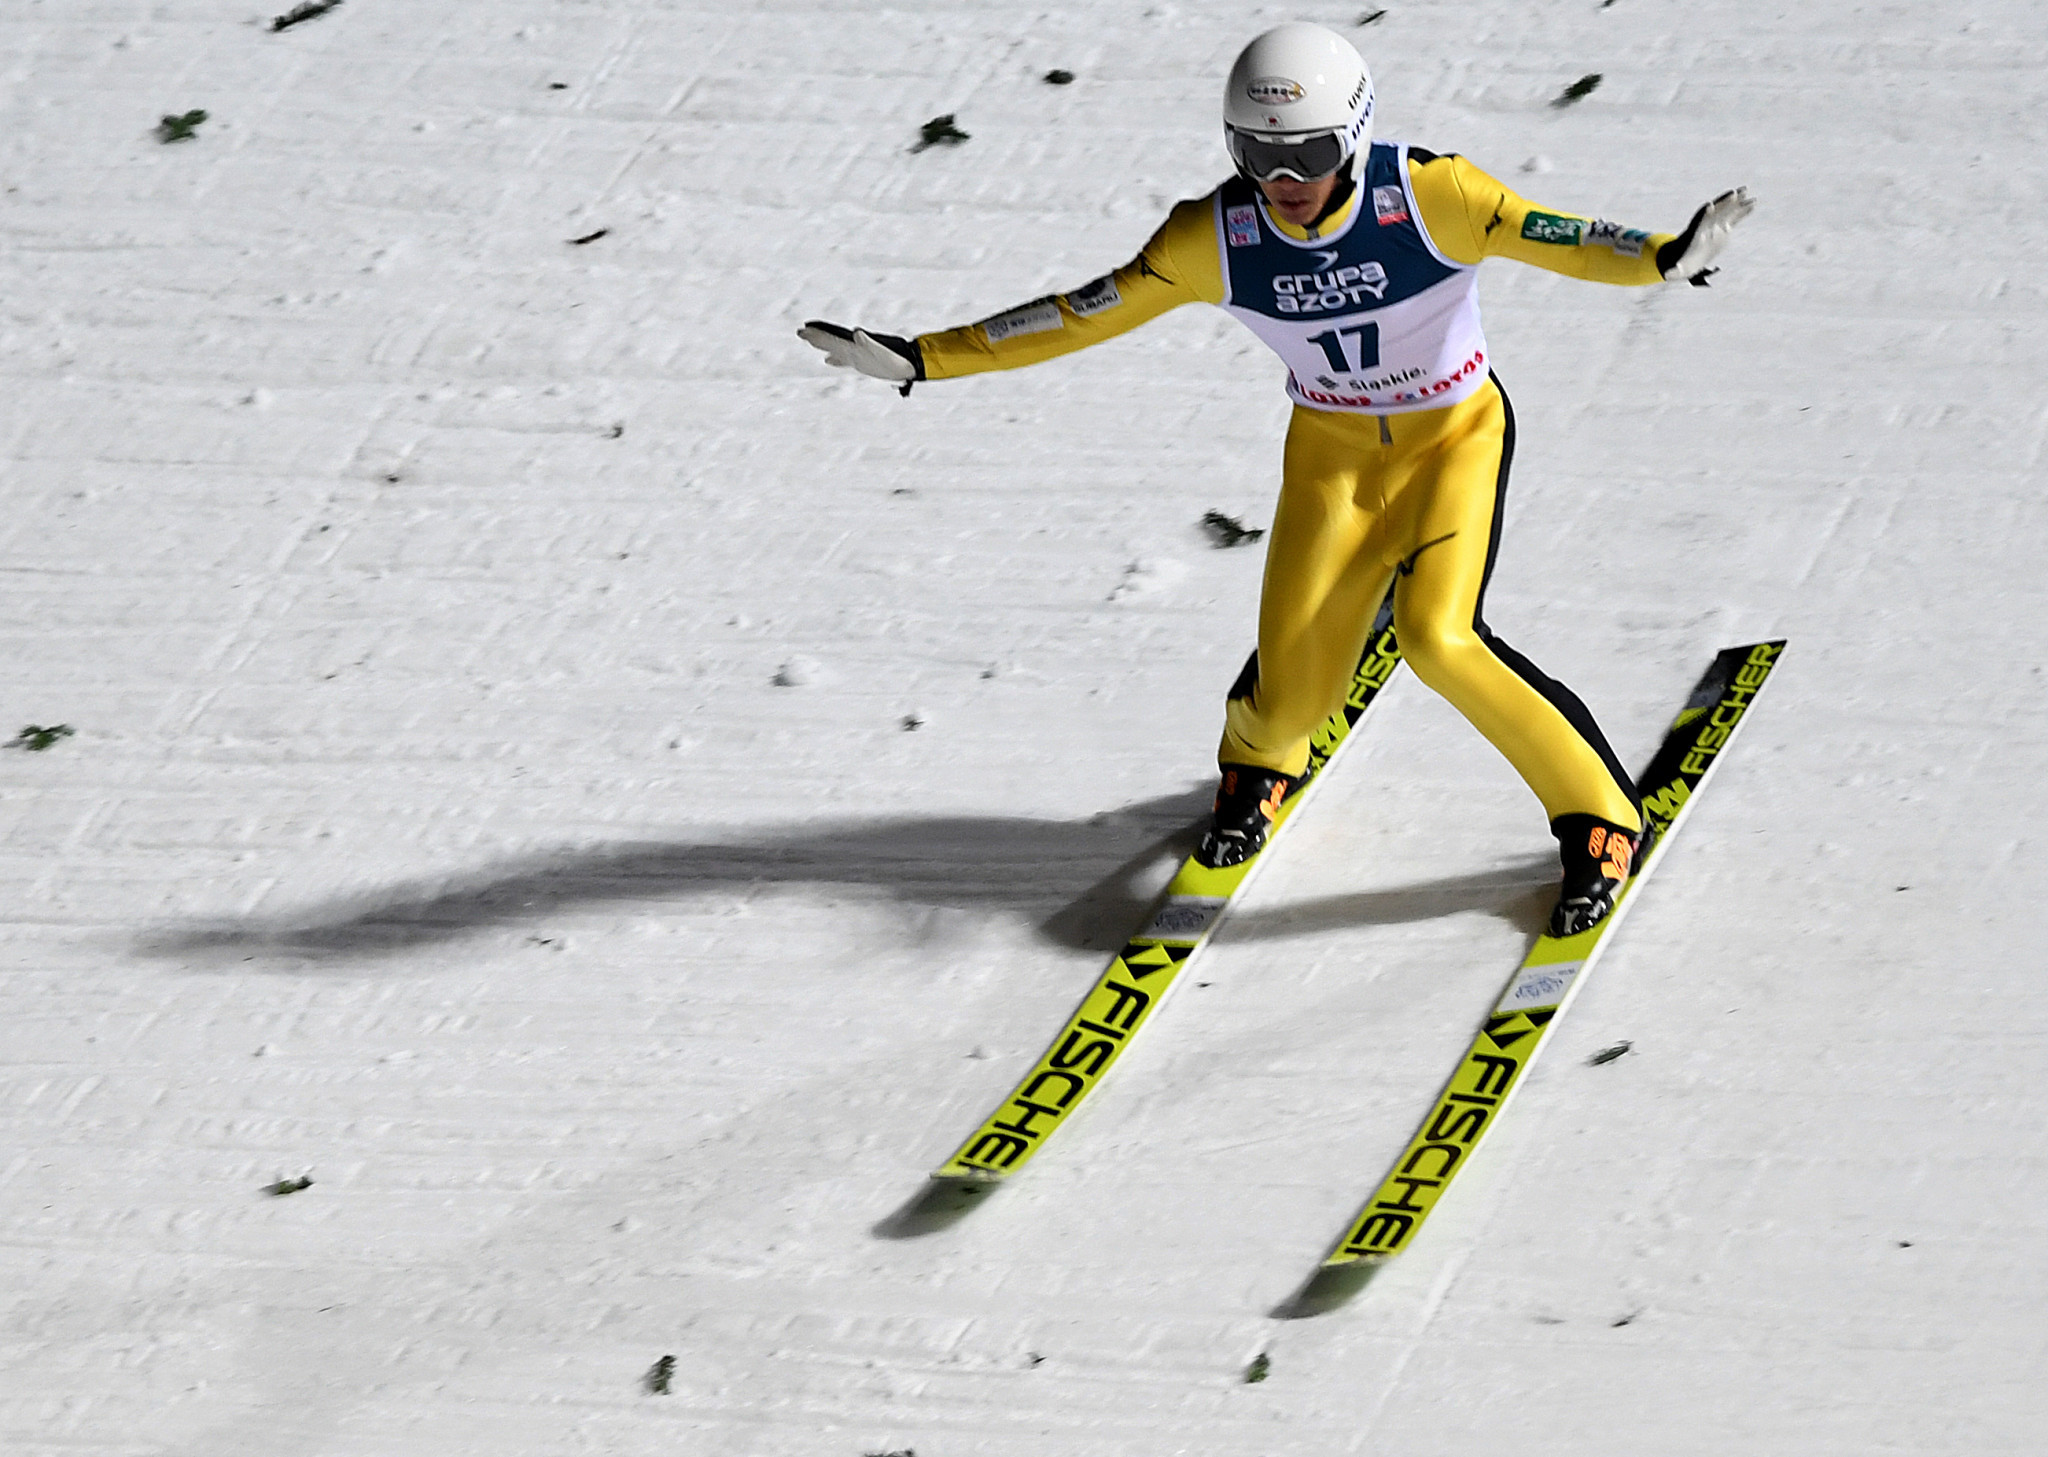 Kraft tops qualification again at FIS Ski Jumping World Cup